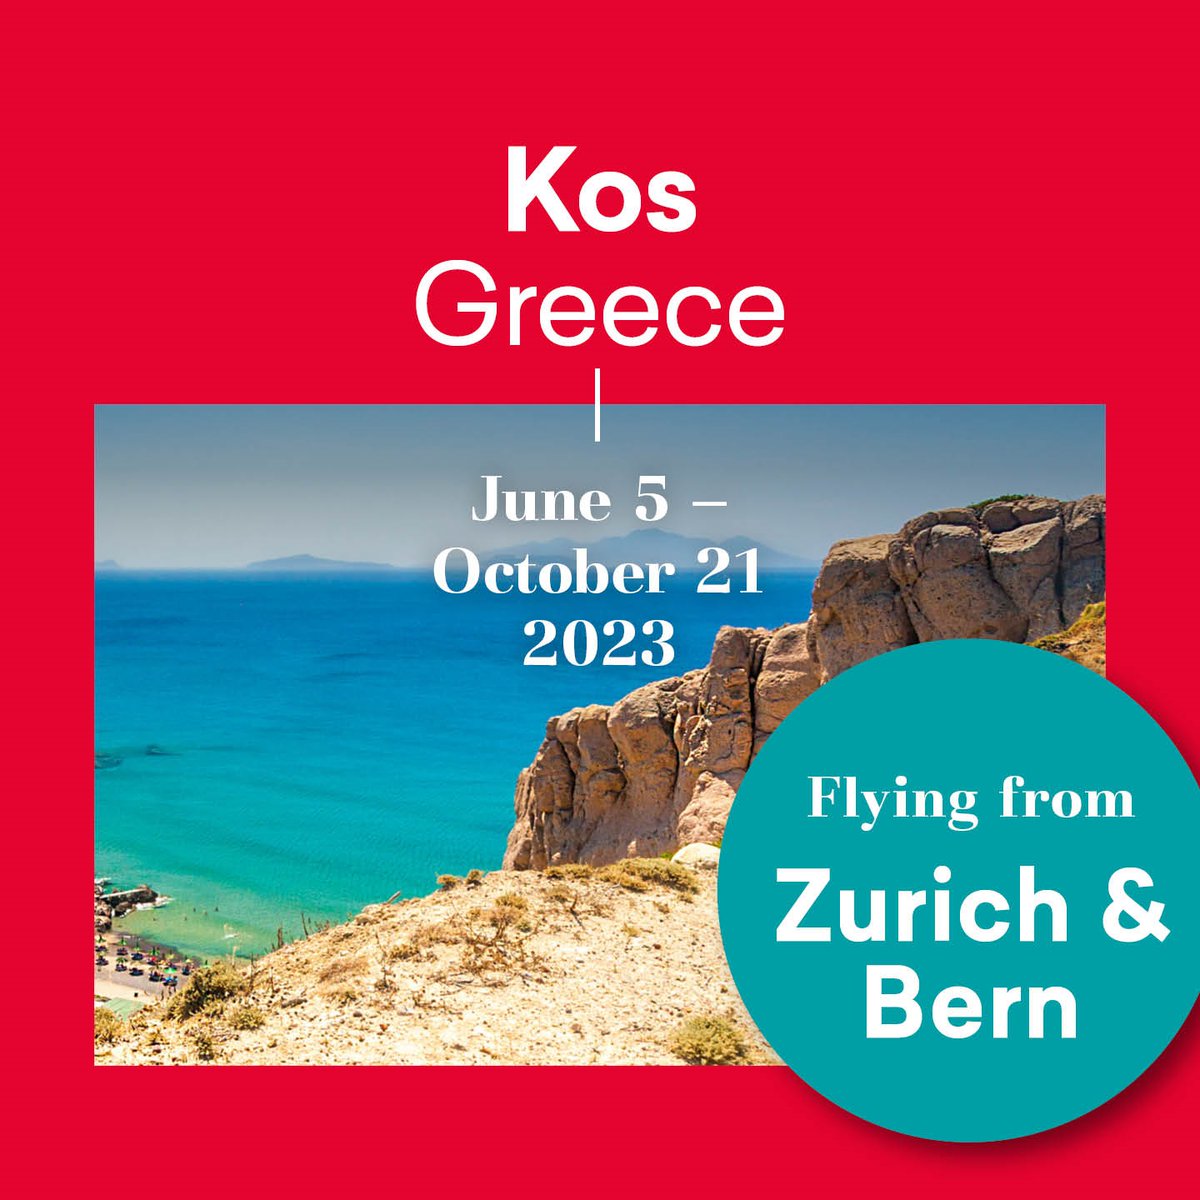 Making life more colourful - Welcome to Kos 🇬🇷🏝️! A paradise island where Greek history meets stunning beaches, vibrant and colourful culture, and delicious Mediterranean cuisine🌺🍽. 💻 Book your flight directly on helvetic.com [LINK IN BIO]